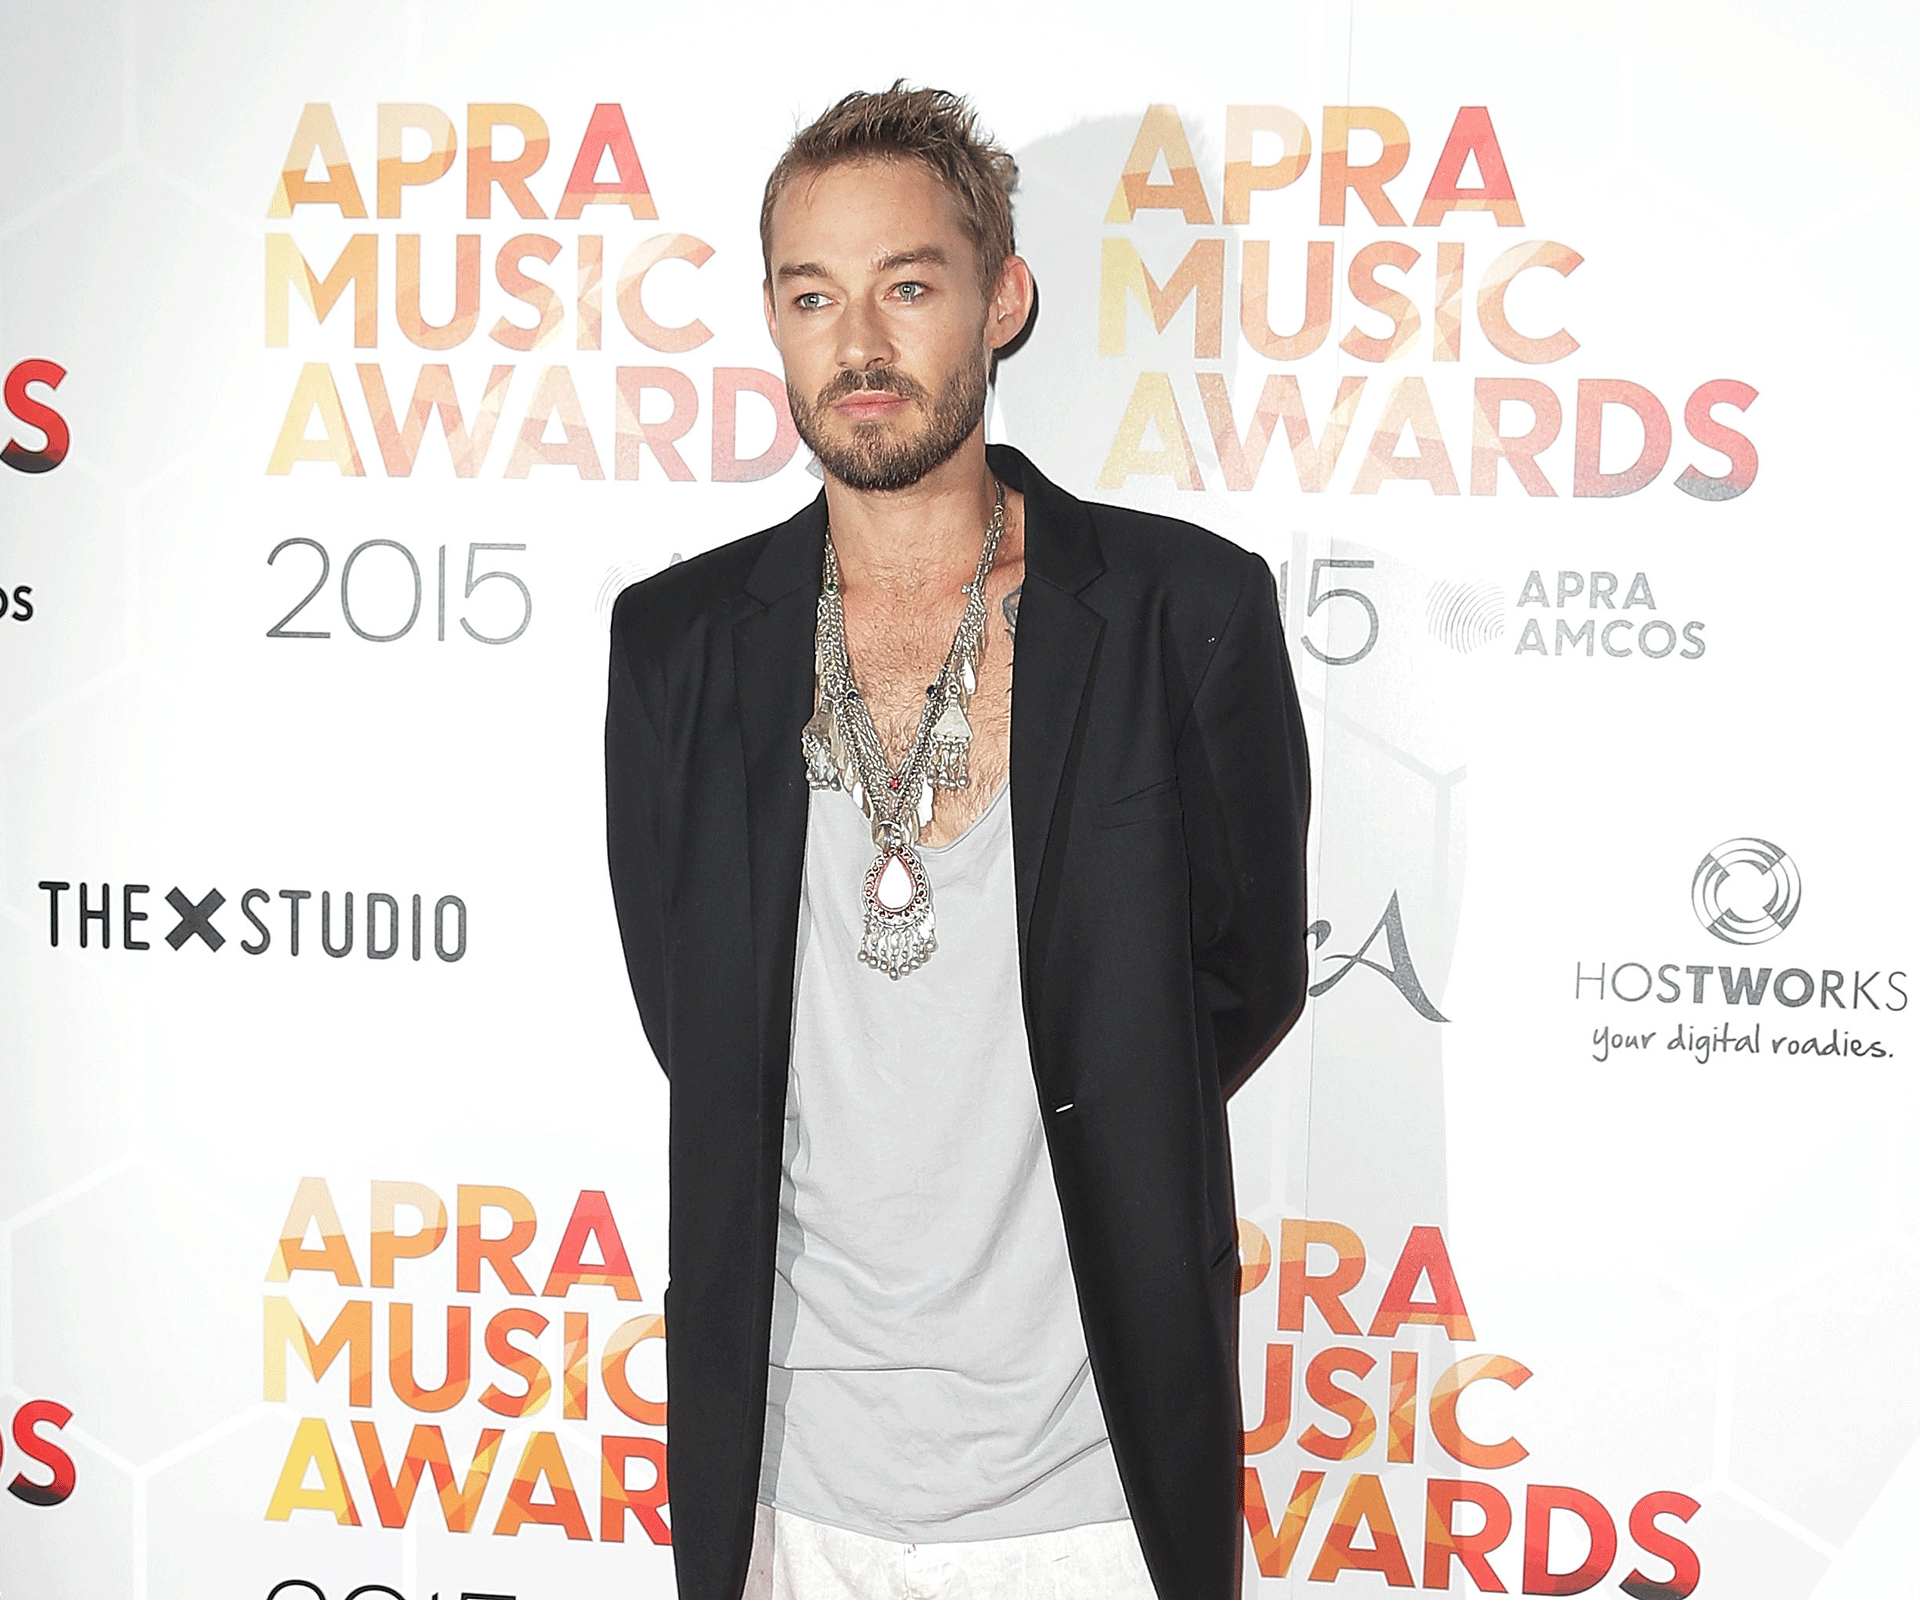 Former Silverchair front man Daniel Johns was sent to hospital after a fall 